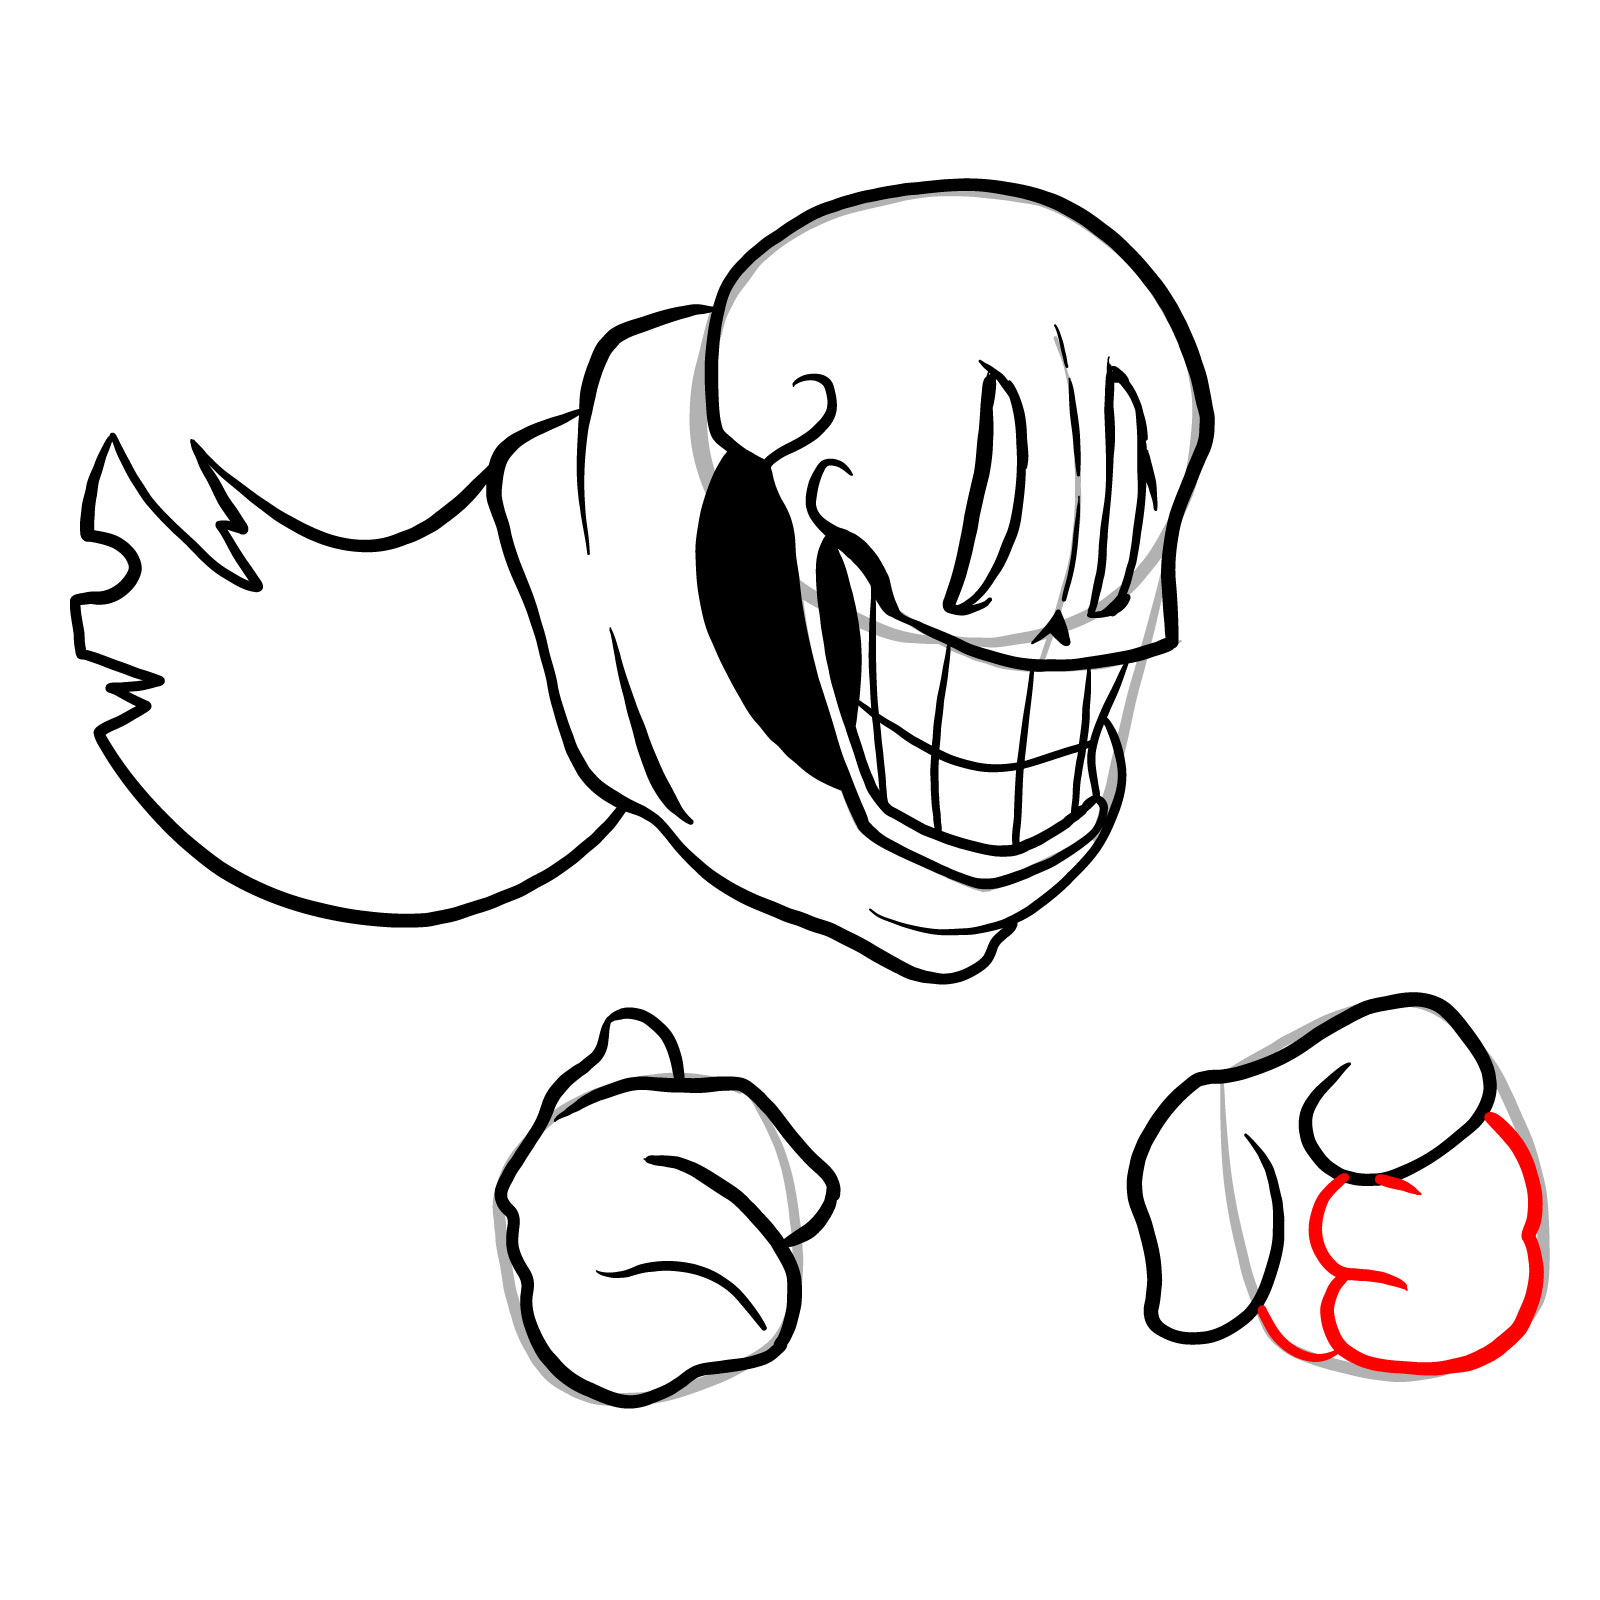 How to draw Phantom!Papyrus from FNF - step 19